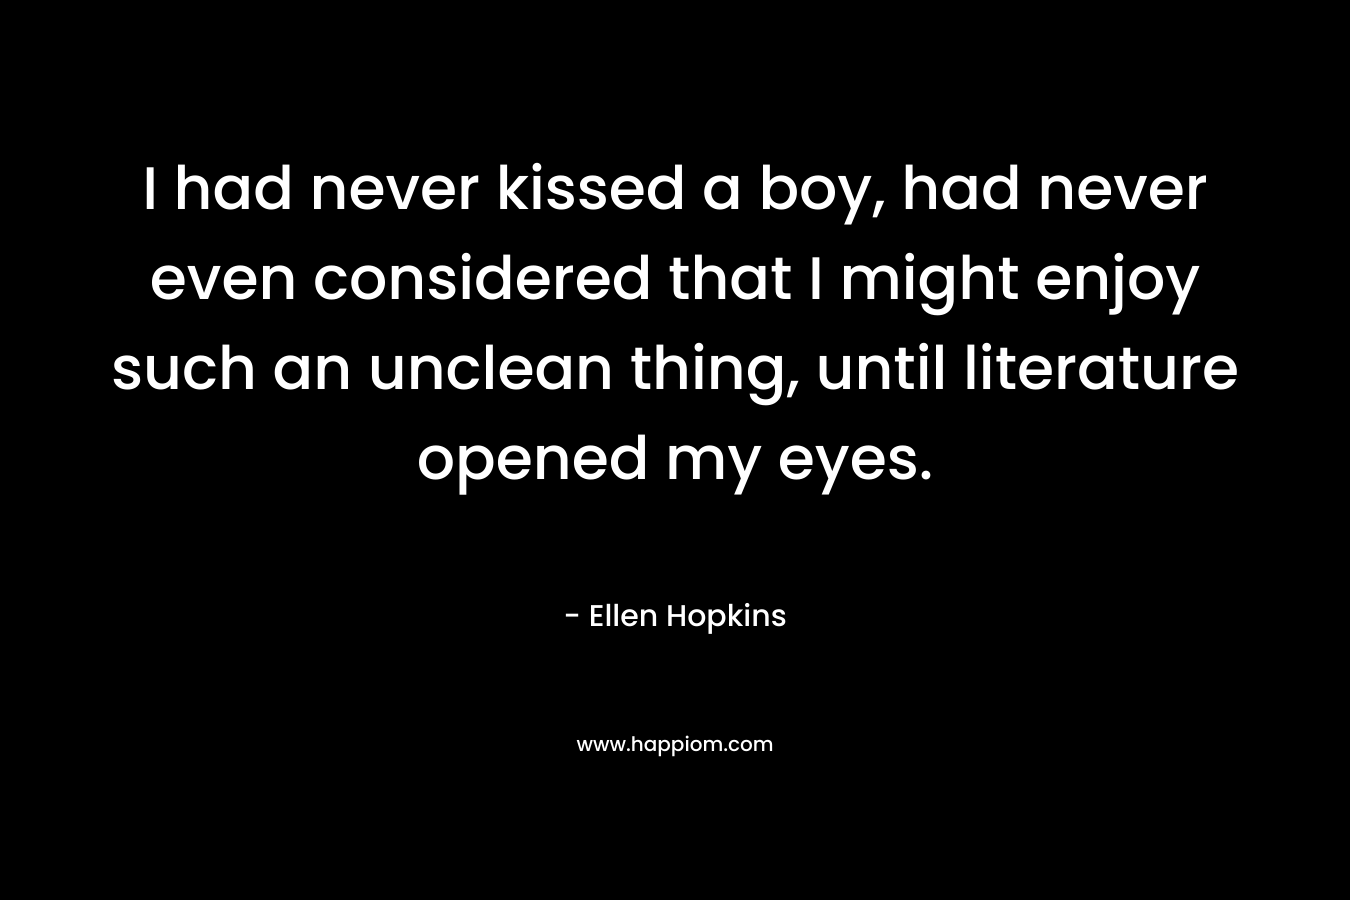 I had never kissed a boy, had never even considered that I might enjoy such an unclean thing, until literature opened my eyes.